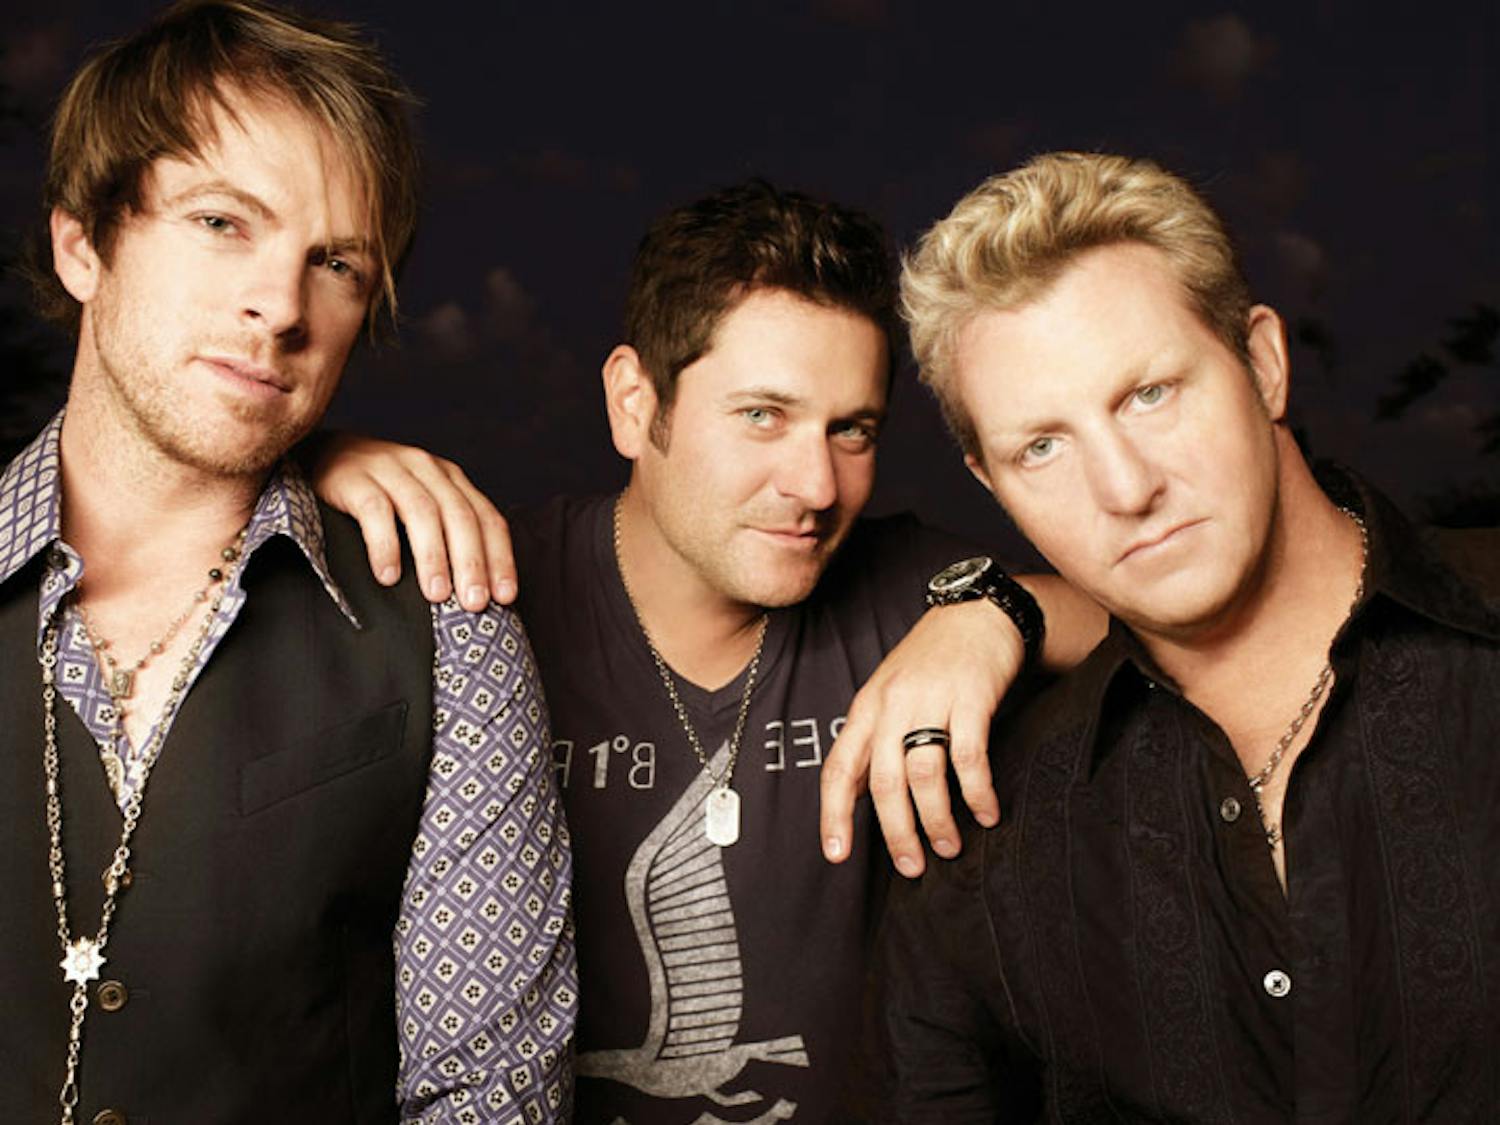 A Gainesville tour date has been added to Rascal Flatts “Changed Tour.” The tour is named for their new album. ‘Changed,’ which came out in April.